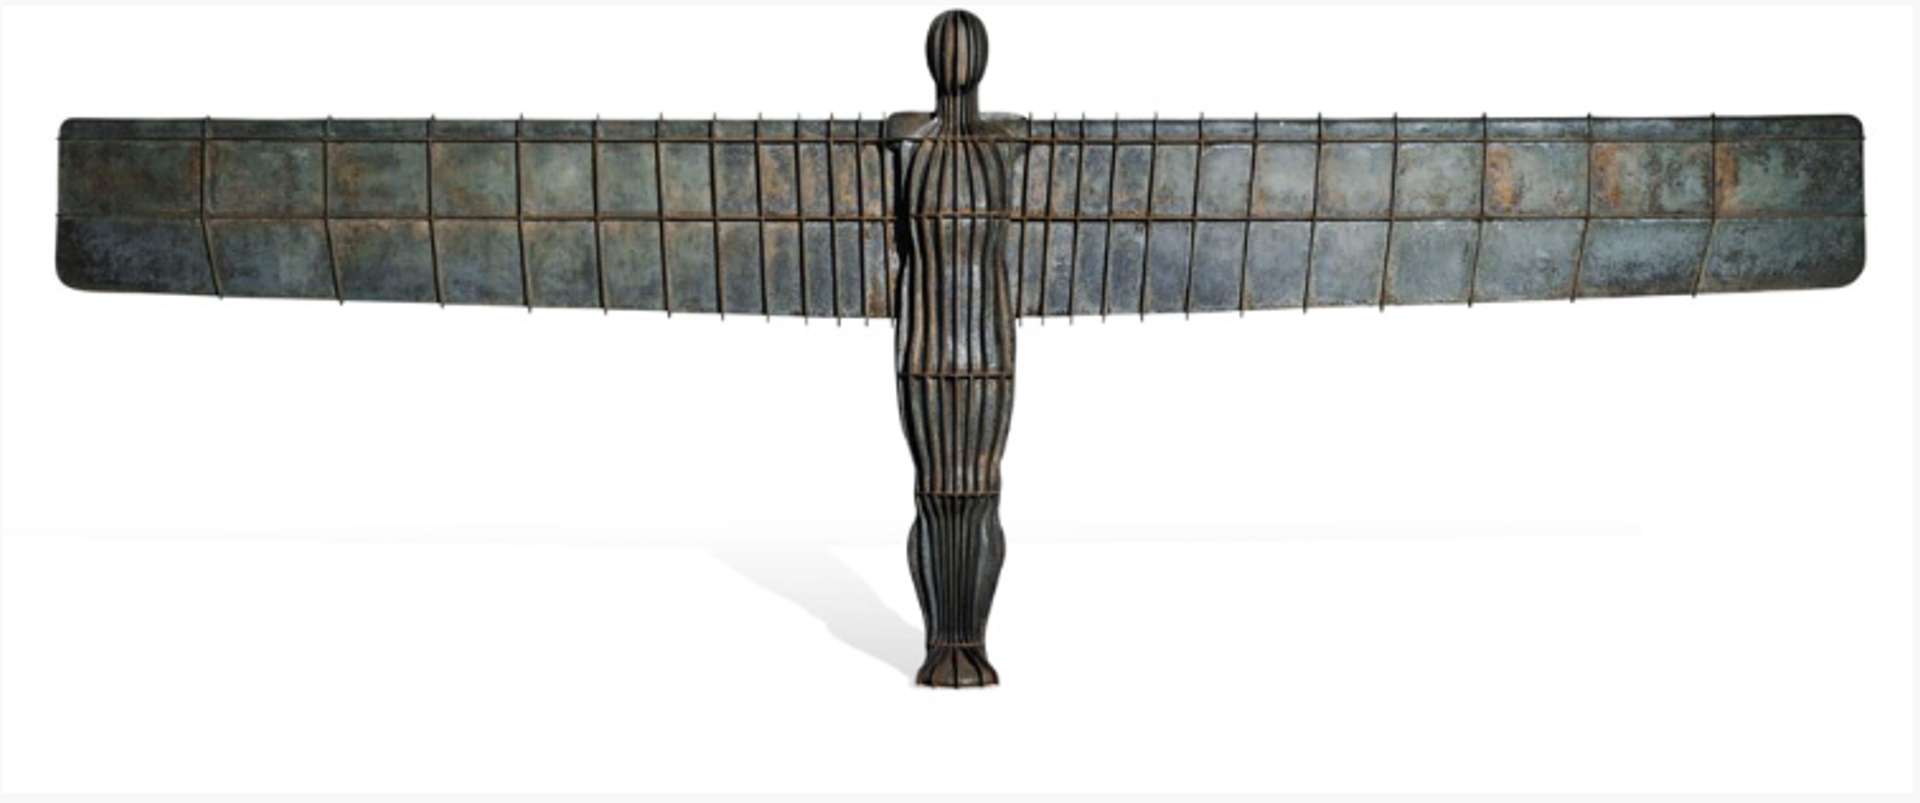 A life-sized sculpture of a human figure, standing upright with slightly bent knees, devoid of any distinct features other than the representation of the human form. The figure is grounded and balanced by a wingspan measuring 54 metres, adding a sense of stability and presence to the sculpture. The artwork is photographed in an empty gallery space, highlighting its monumental scale and minimalist aesthetic.